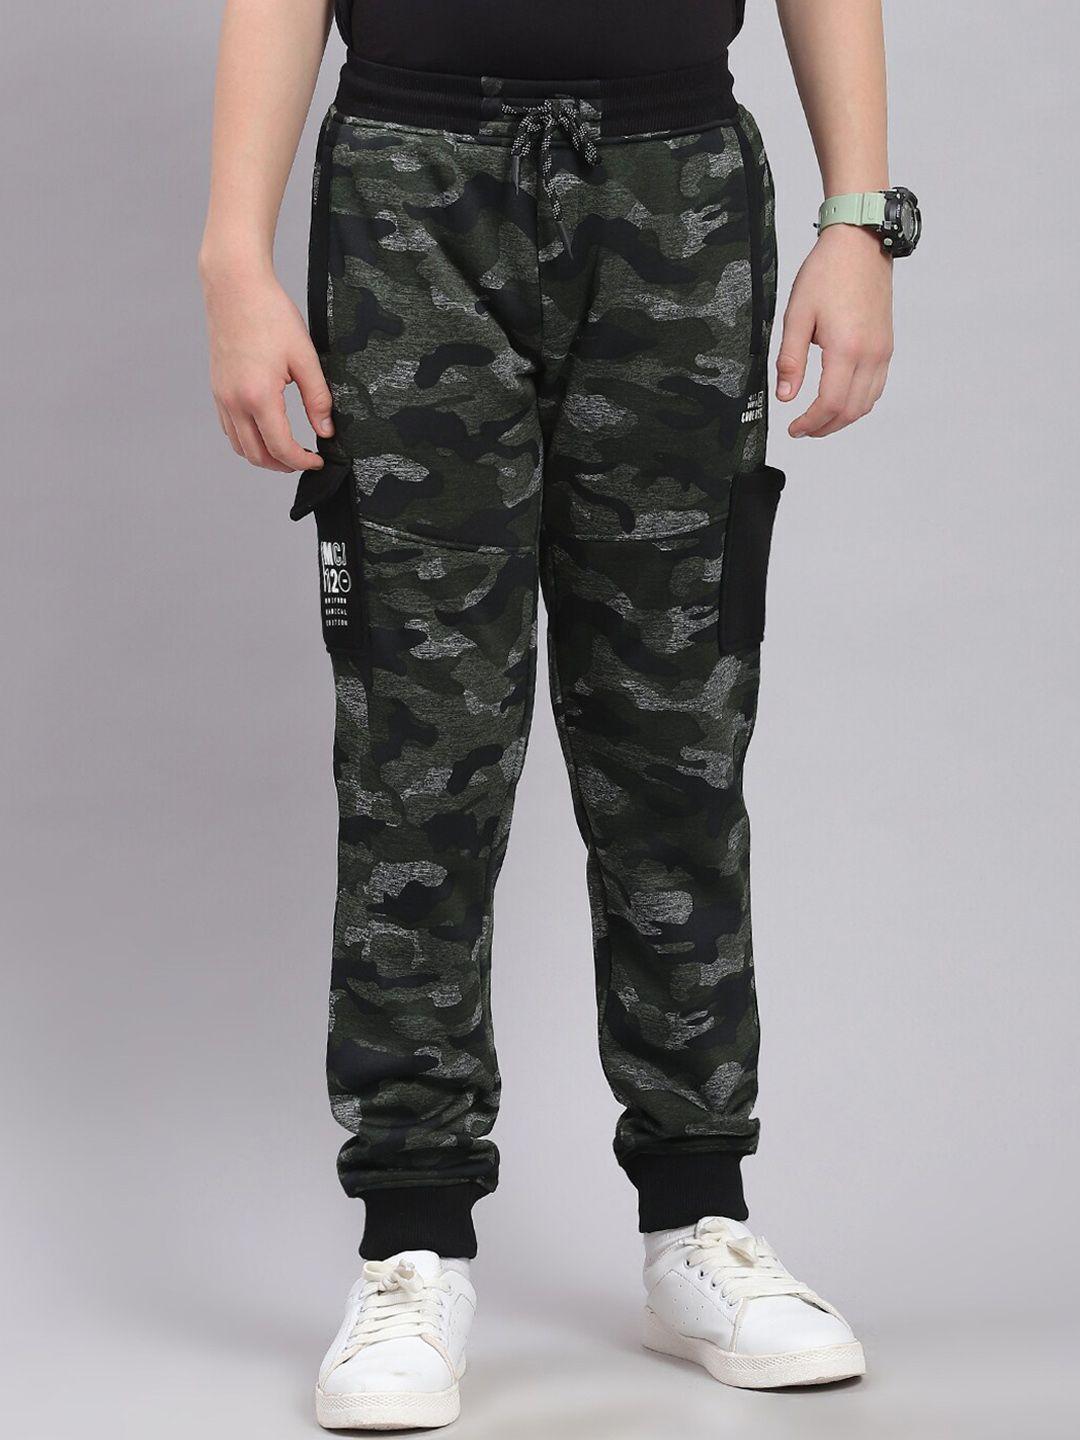 monte carlo boys camouflage printed mid-rise joggers